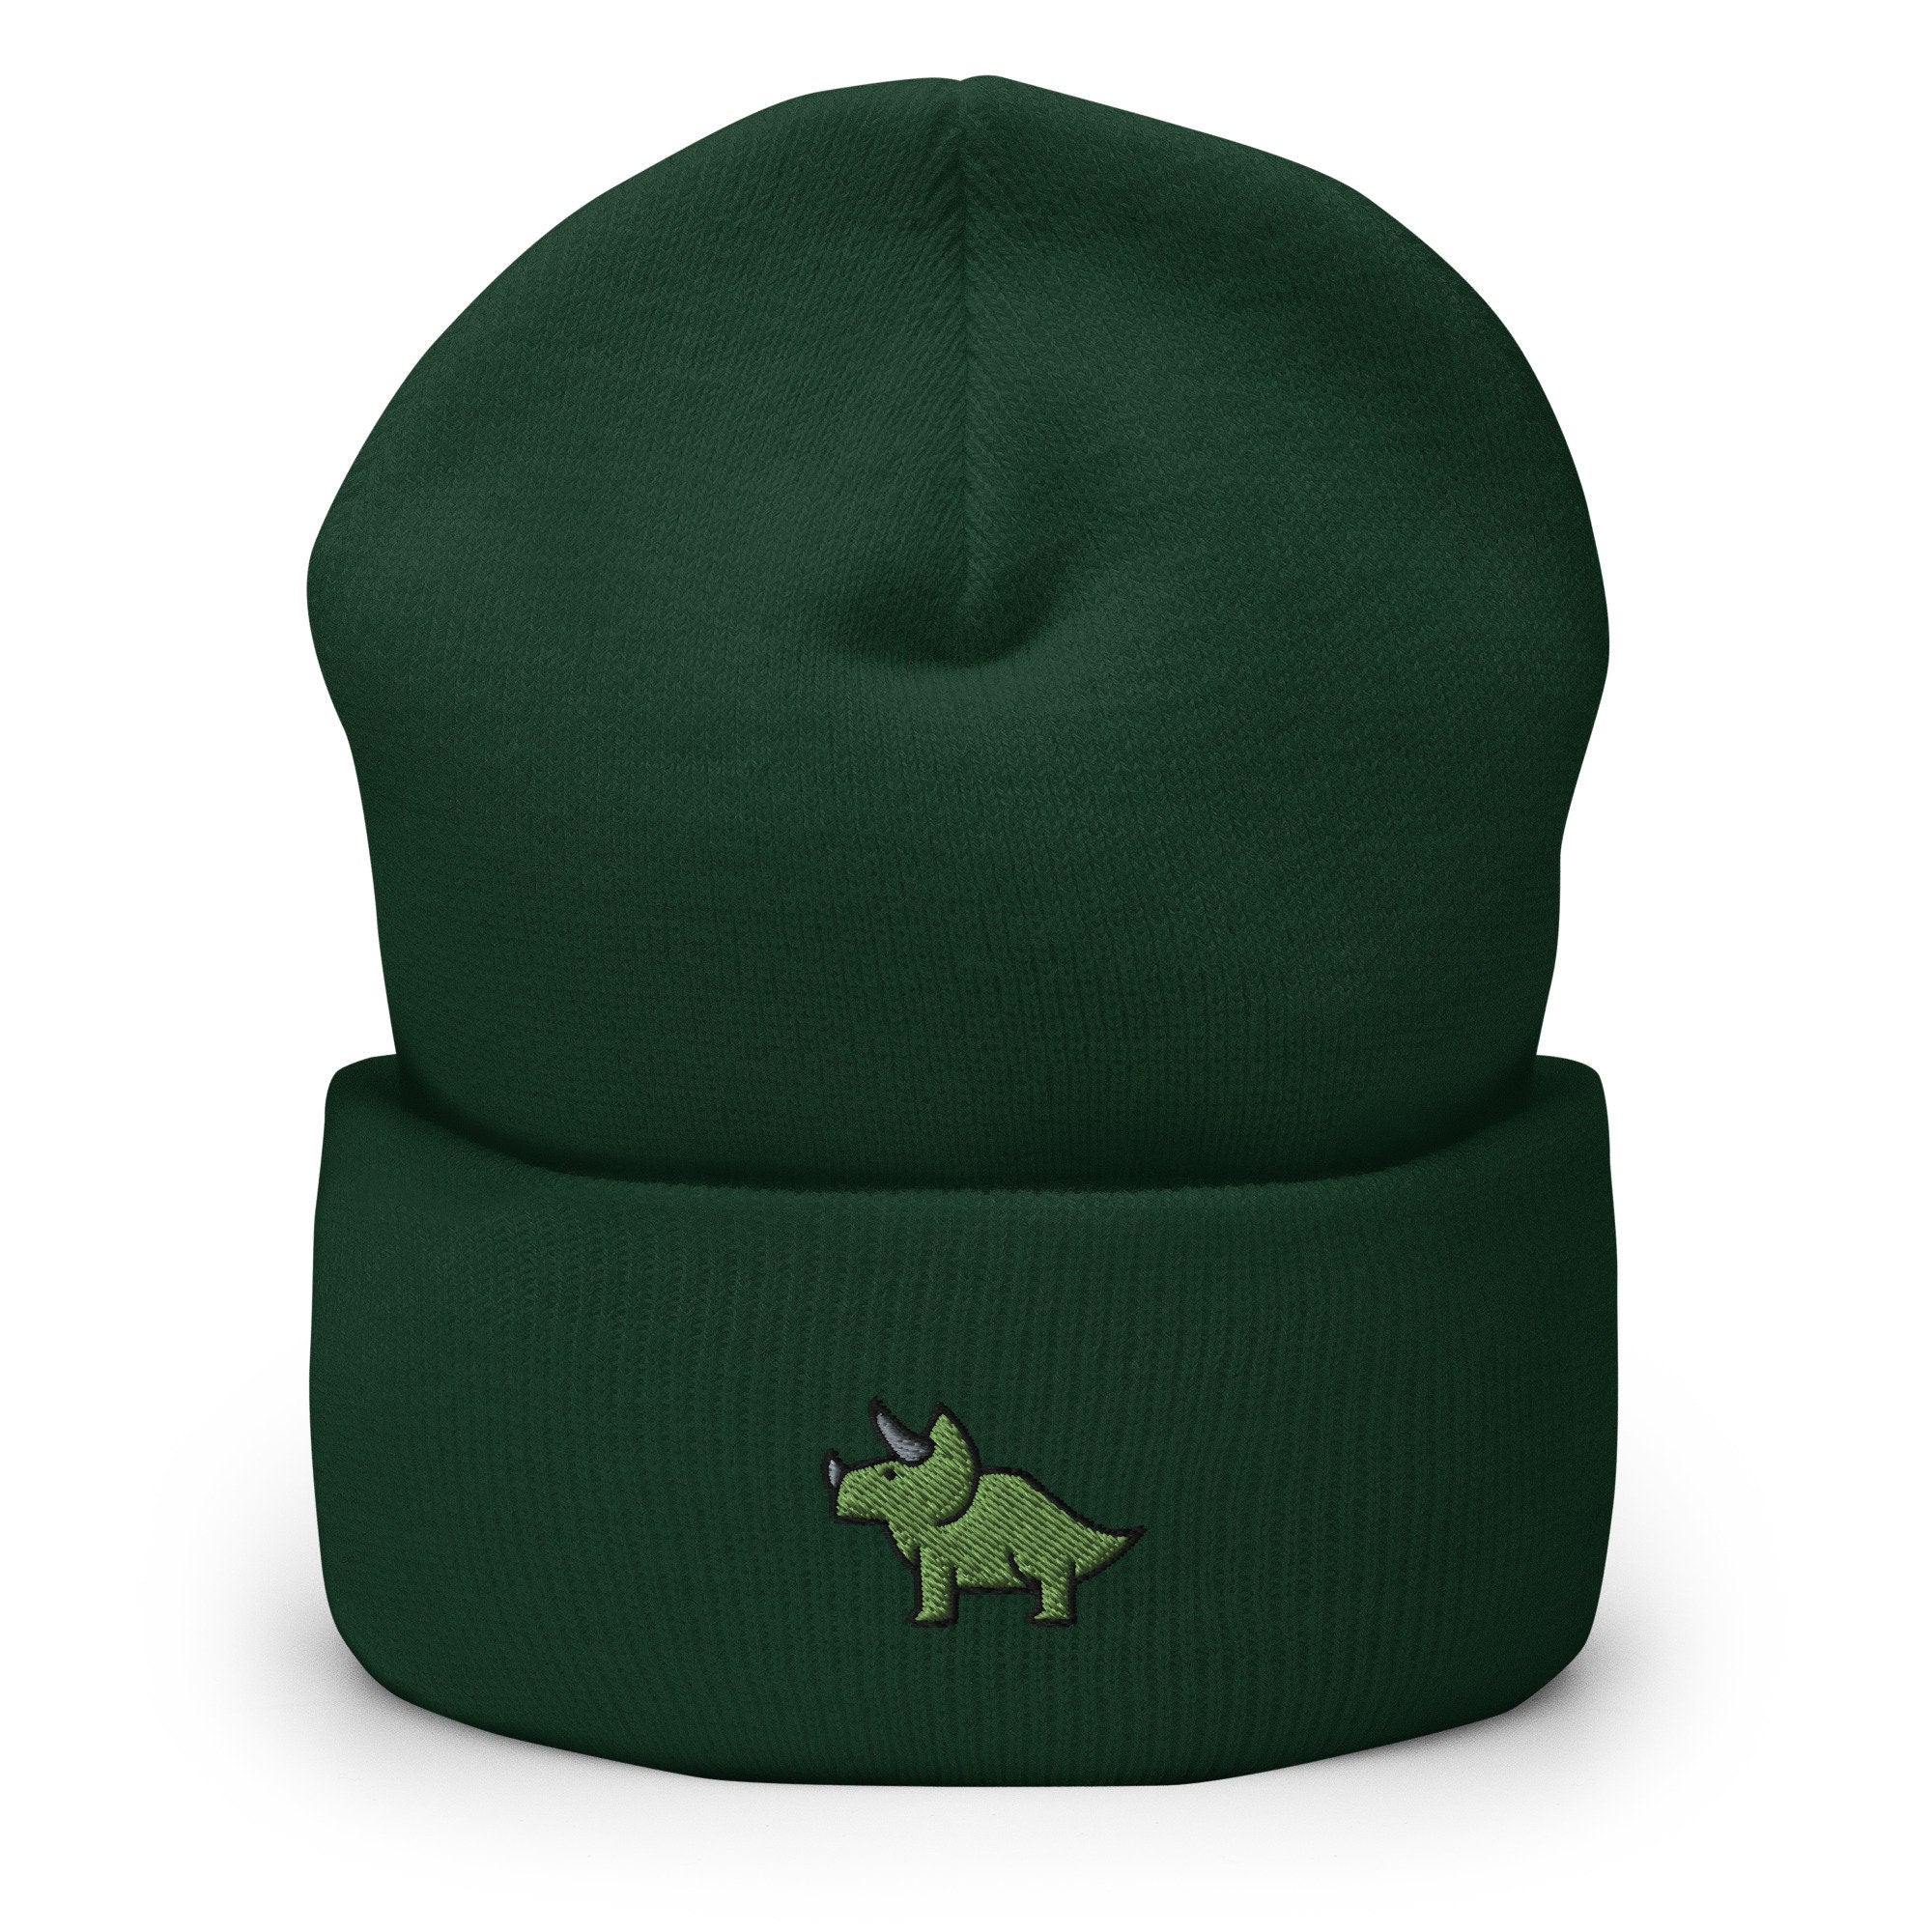 Triceratops Dinosaur Embroidered Beanie, Handmade Cuffed Knit Unisex Slouchy Adult Winter Hat Cap Gift